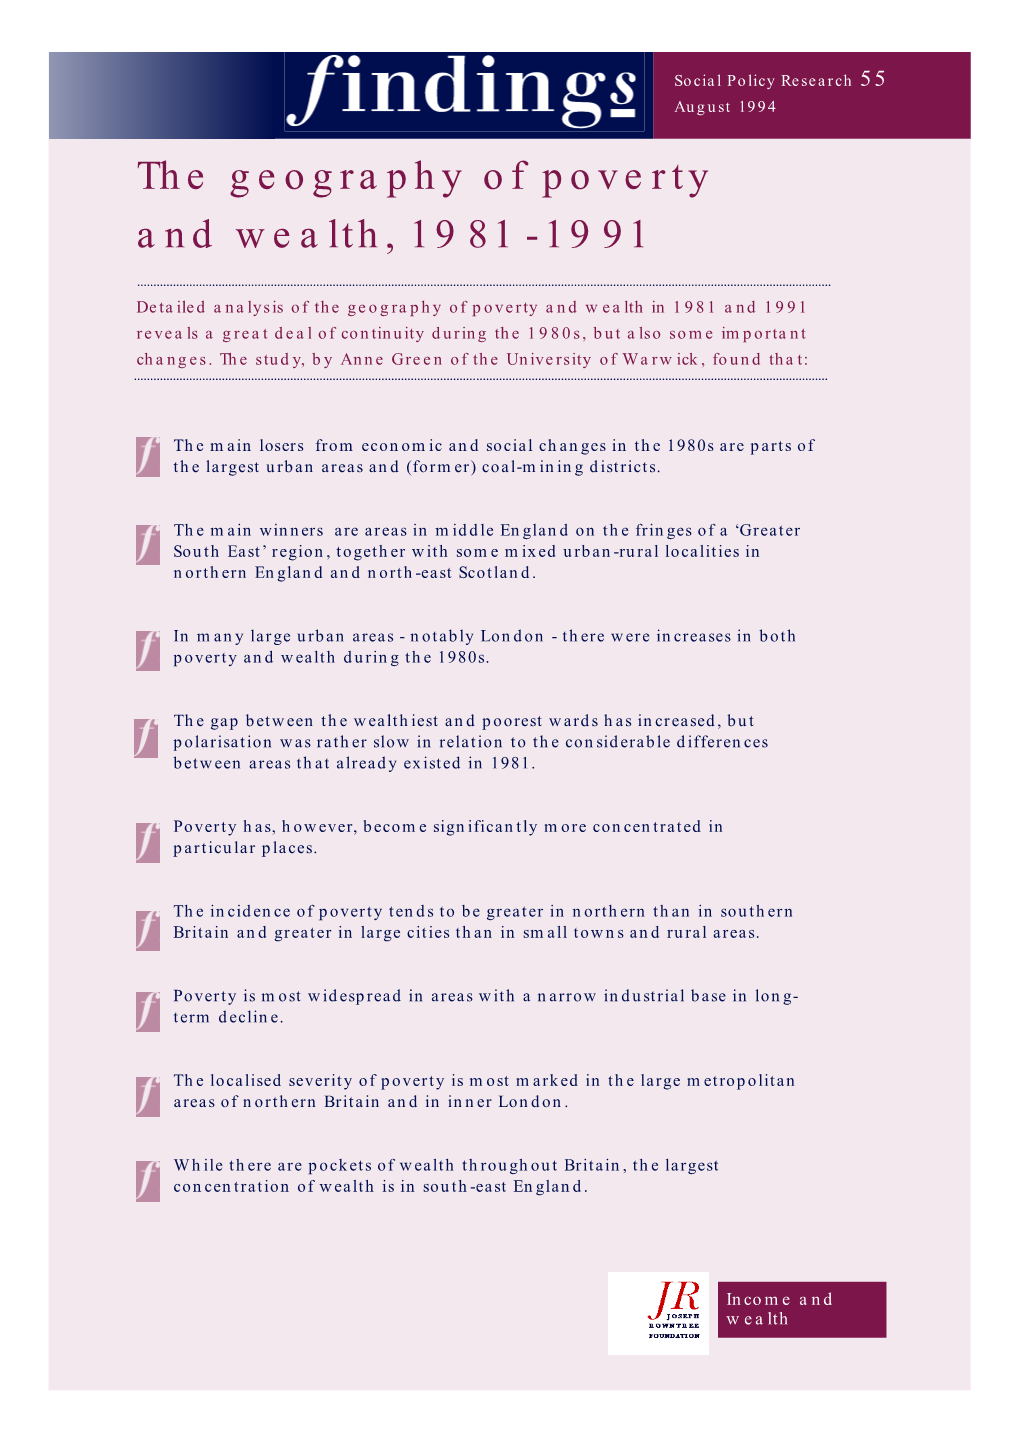 The Geography of Poverty and Wealth, 1981-1991